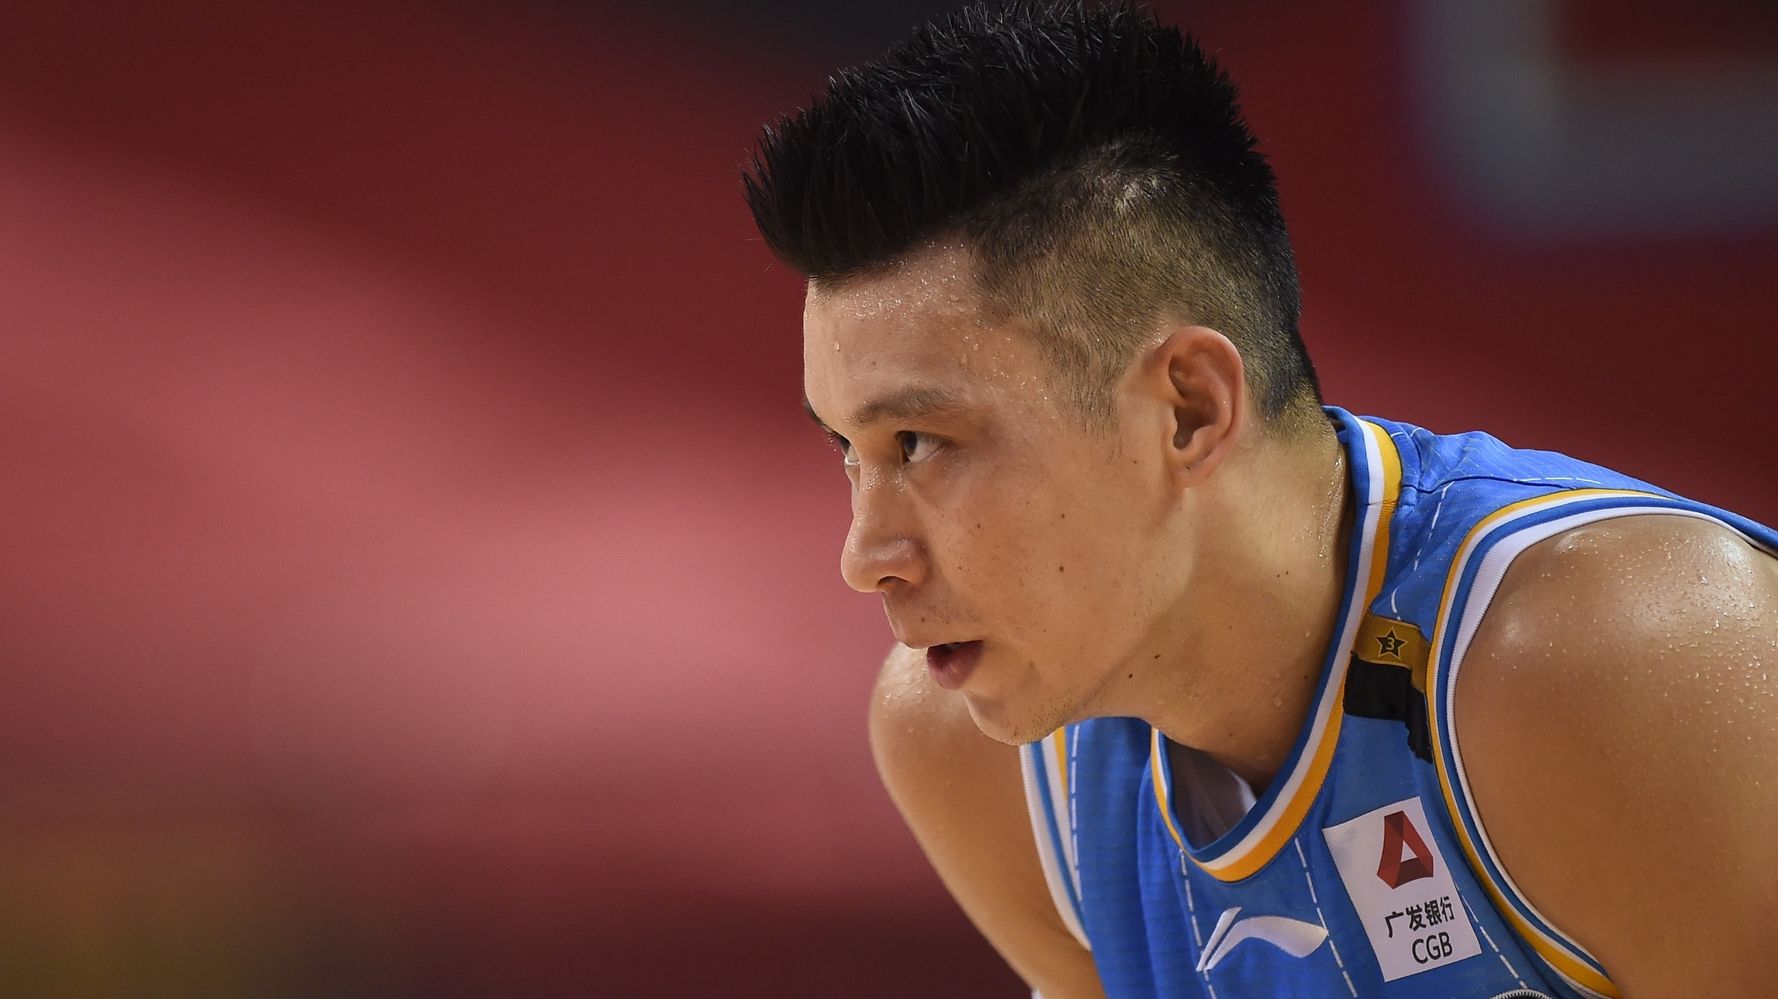 Basketball officials investigating complaint that Jeremy Lin was called ‘Coronavirus’ on the court